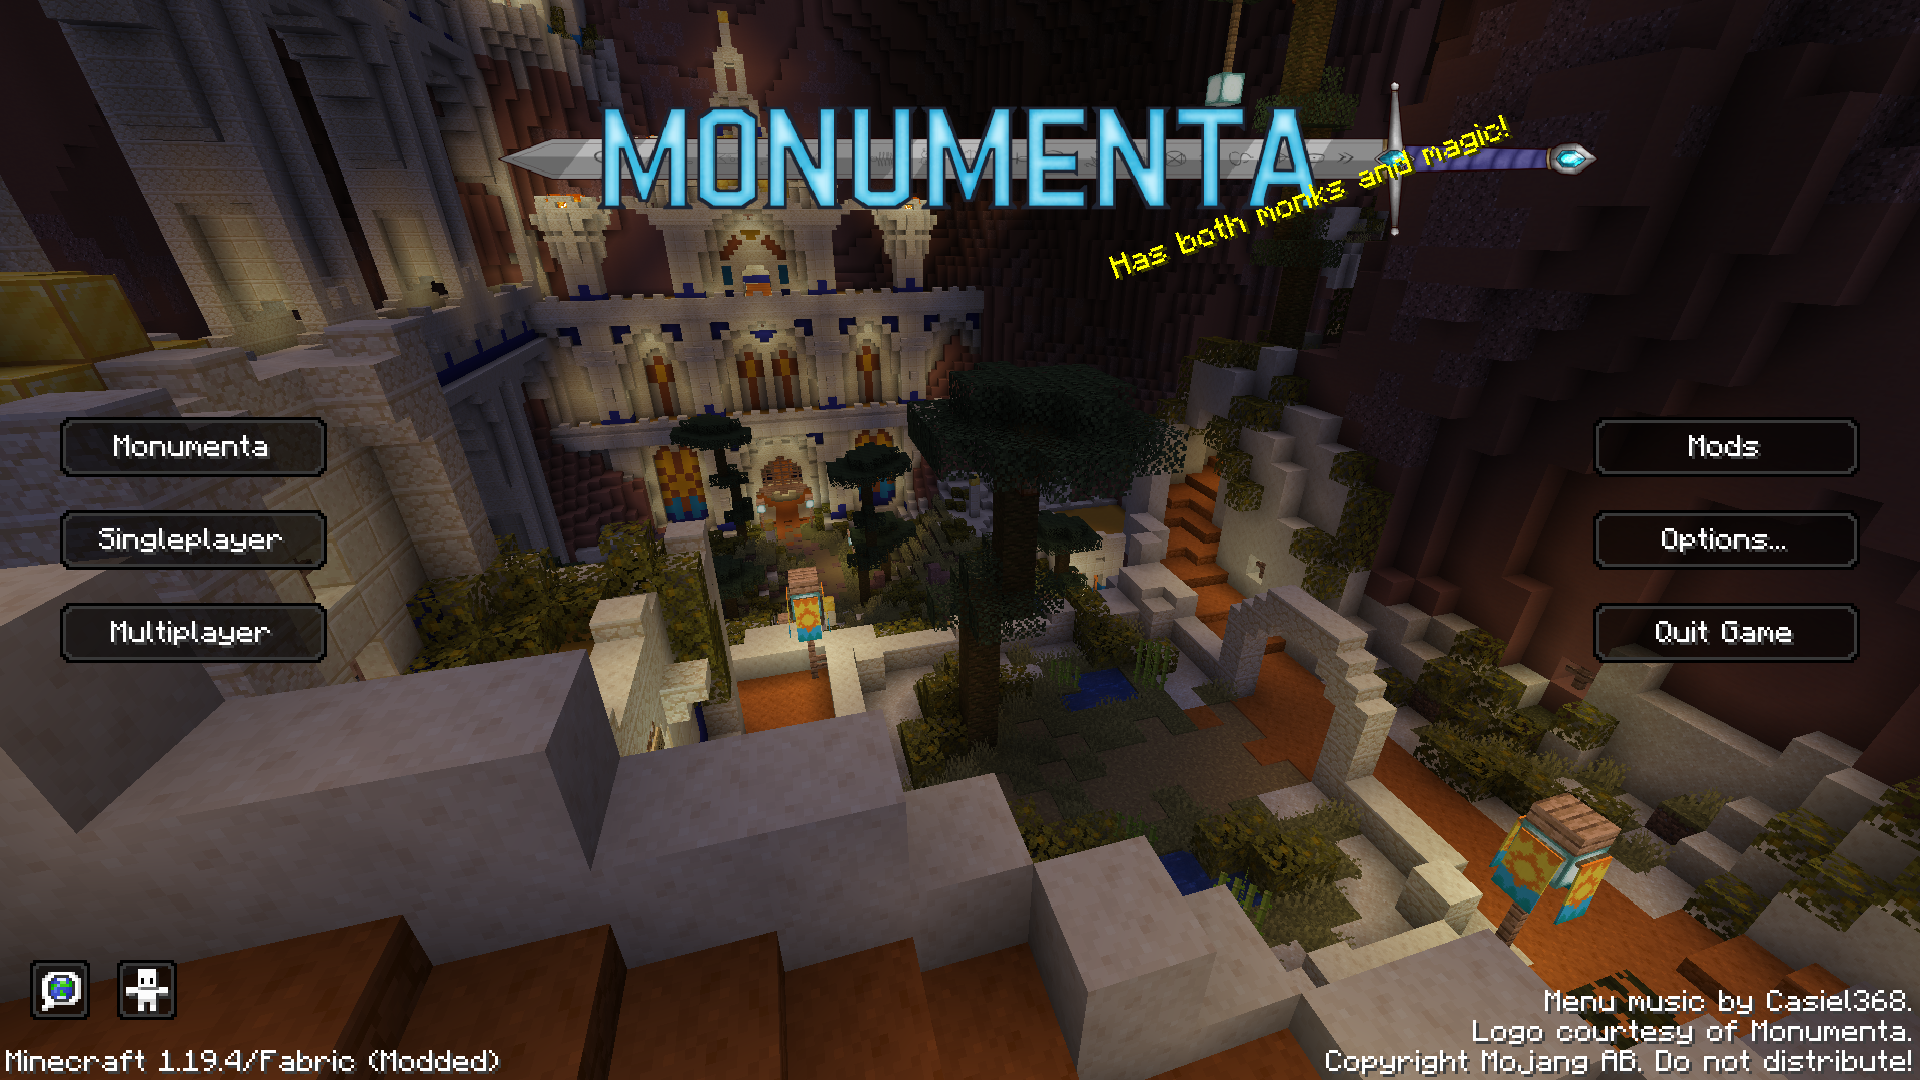 Using FancyMenu, the modpack provides a custom main menu with a shortcut button to join the server directly.